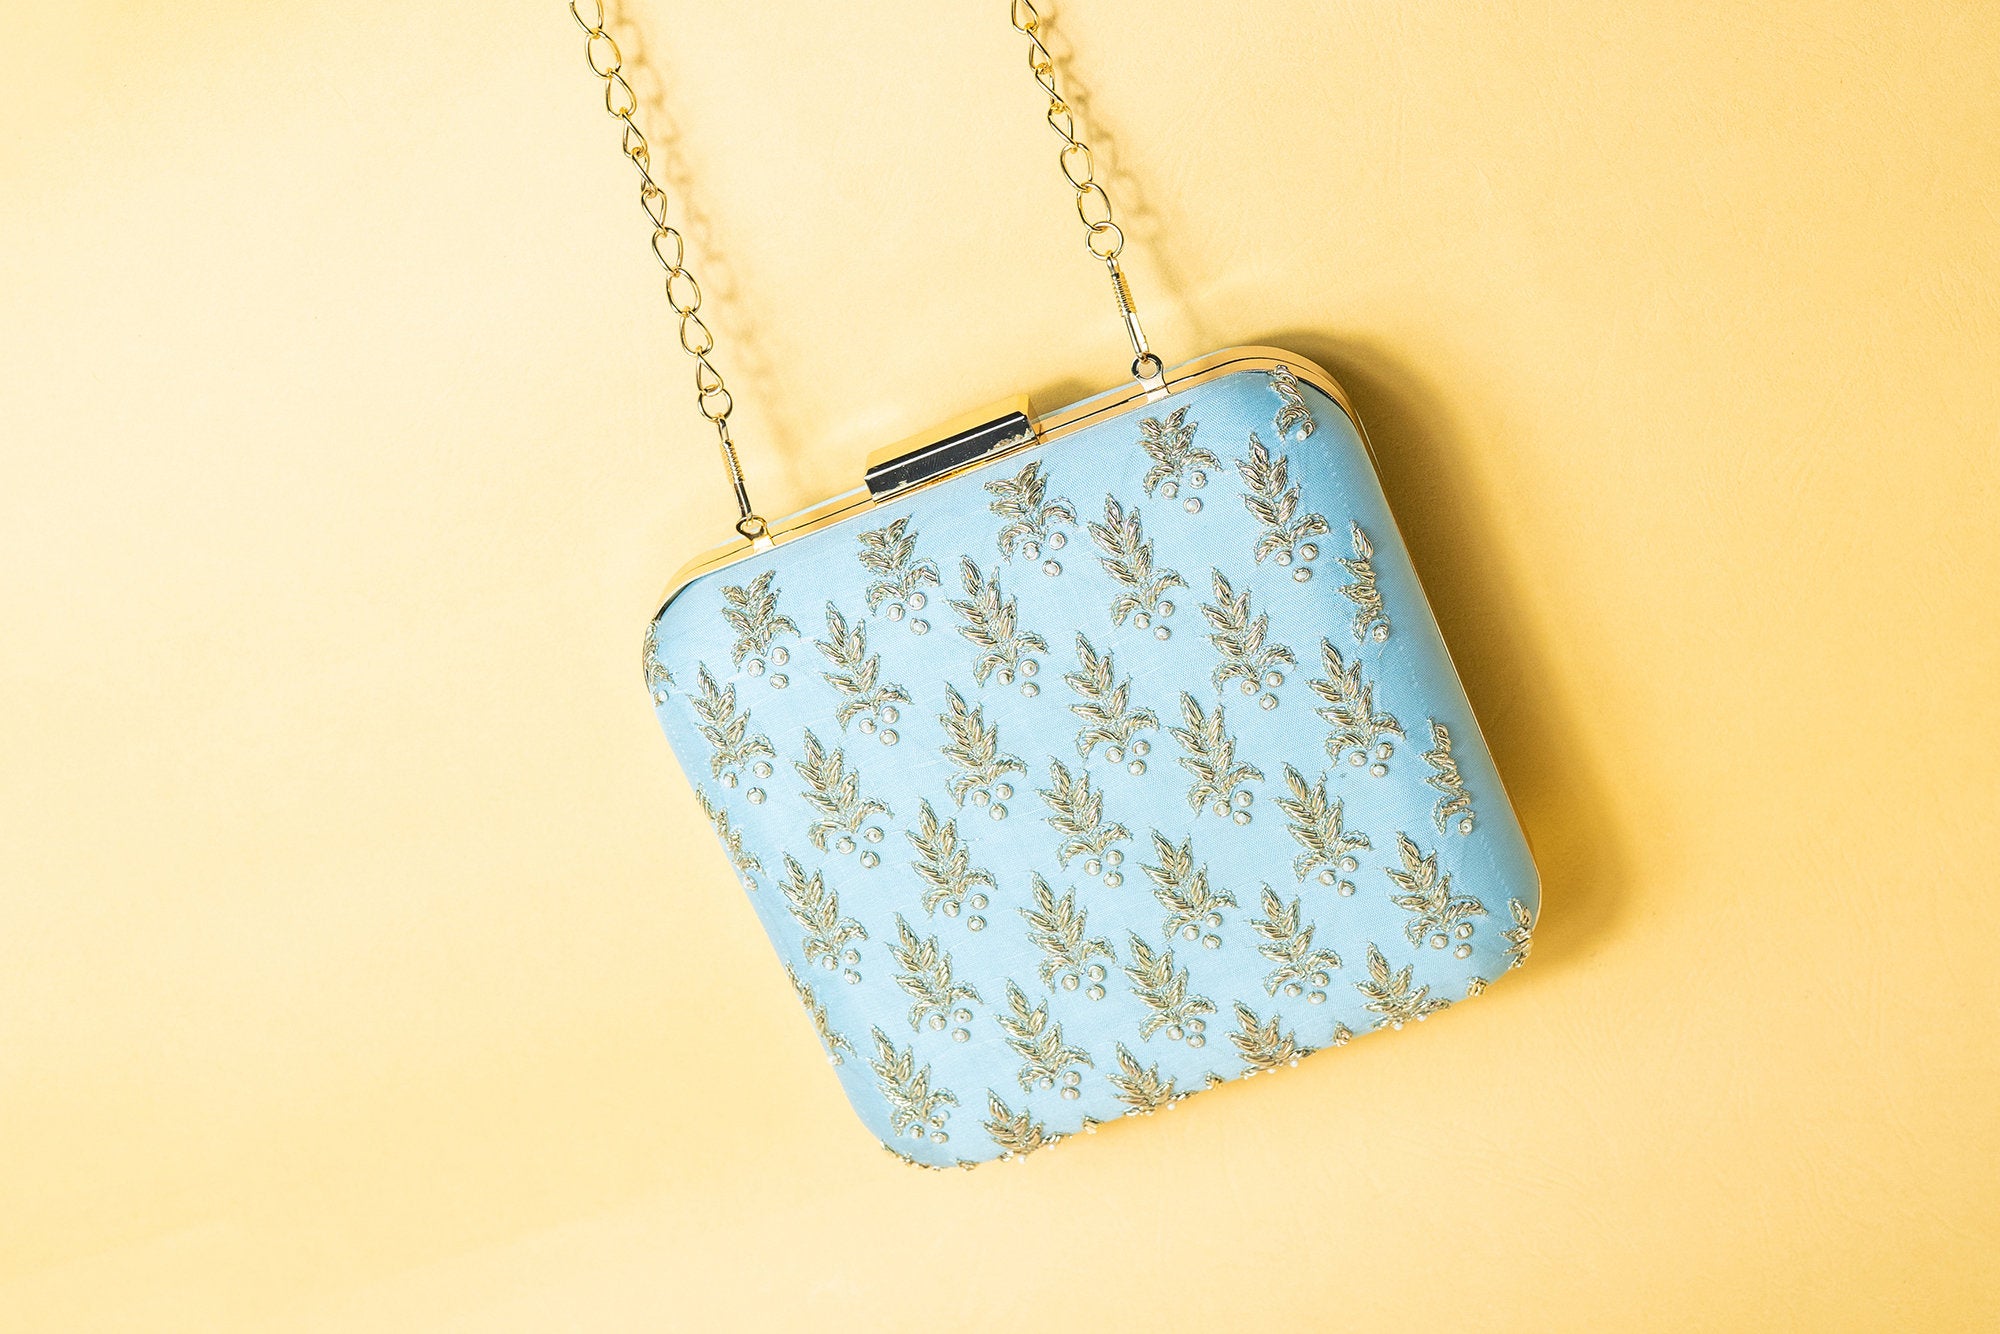 Powder blue and gold square hand made bead embroidery and pure silk clutch bag detachable sling